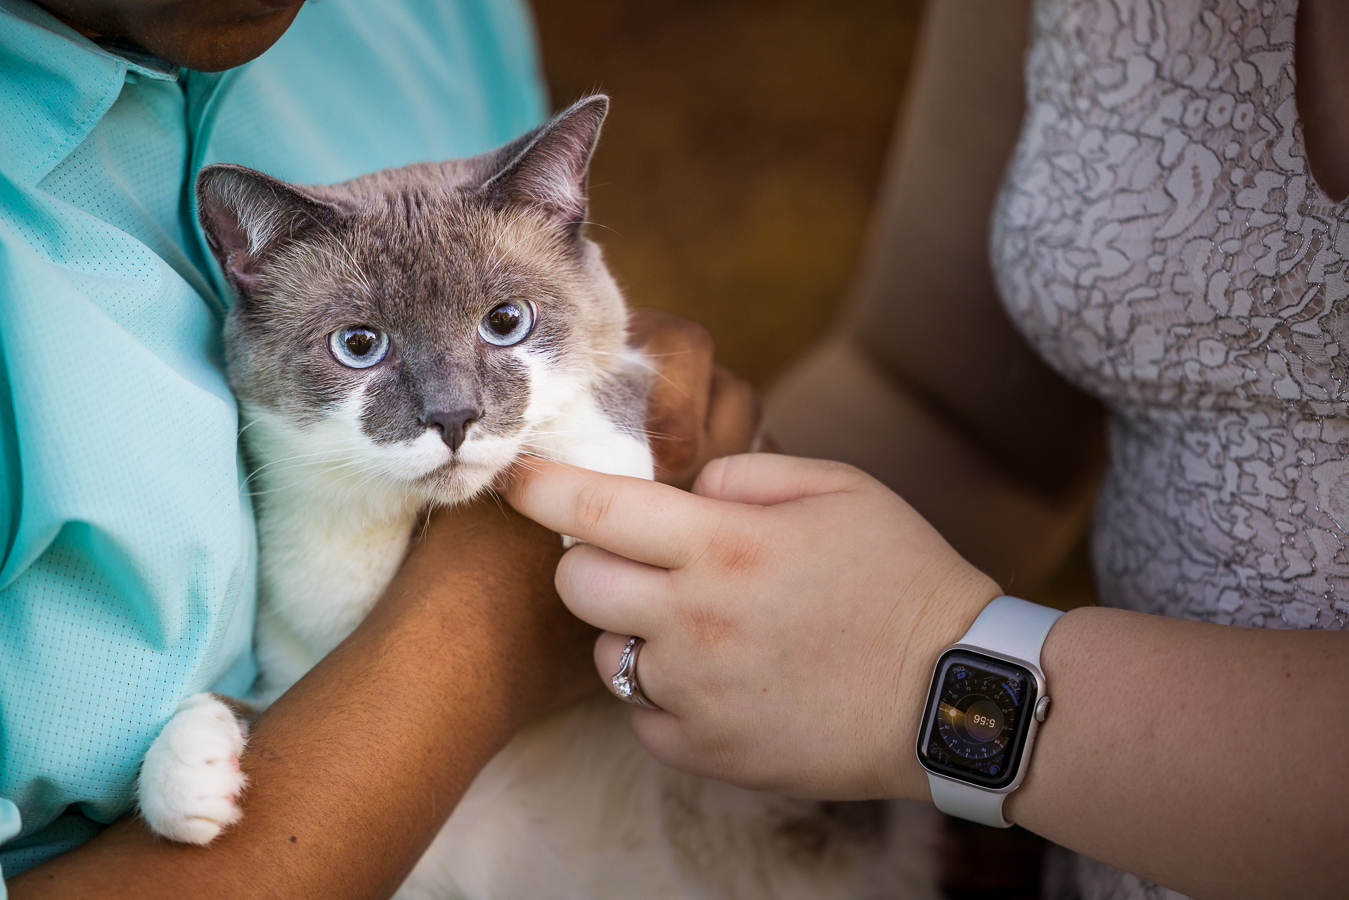 animal portrait photographer, lisa rhinehart, captures this image of the couples cat with vibrant blue eyes after their intimate wedding ceremony in spencerville Maryland 